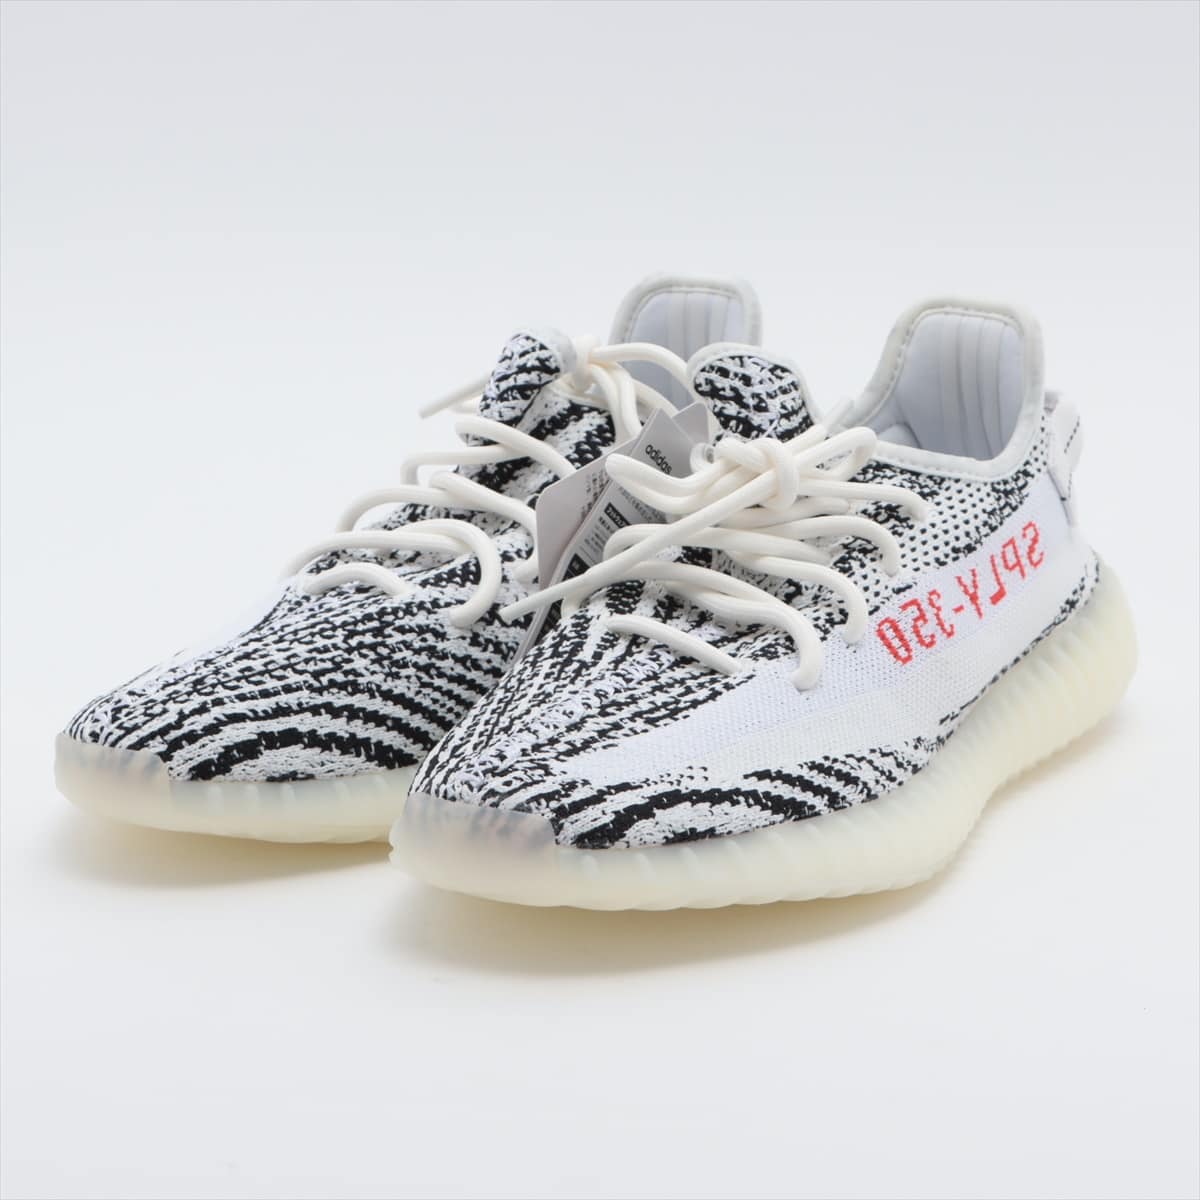 Adidas YEEZY BOOST 350 V2 Knit Sneakers 27.5cm Men's Black × White CP9654